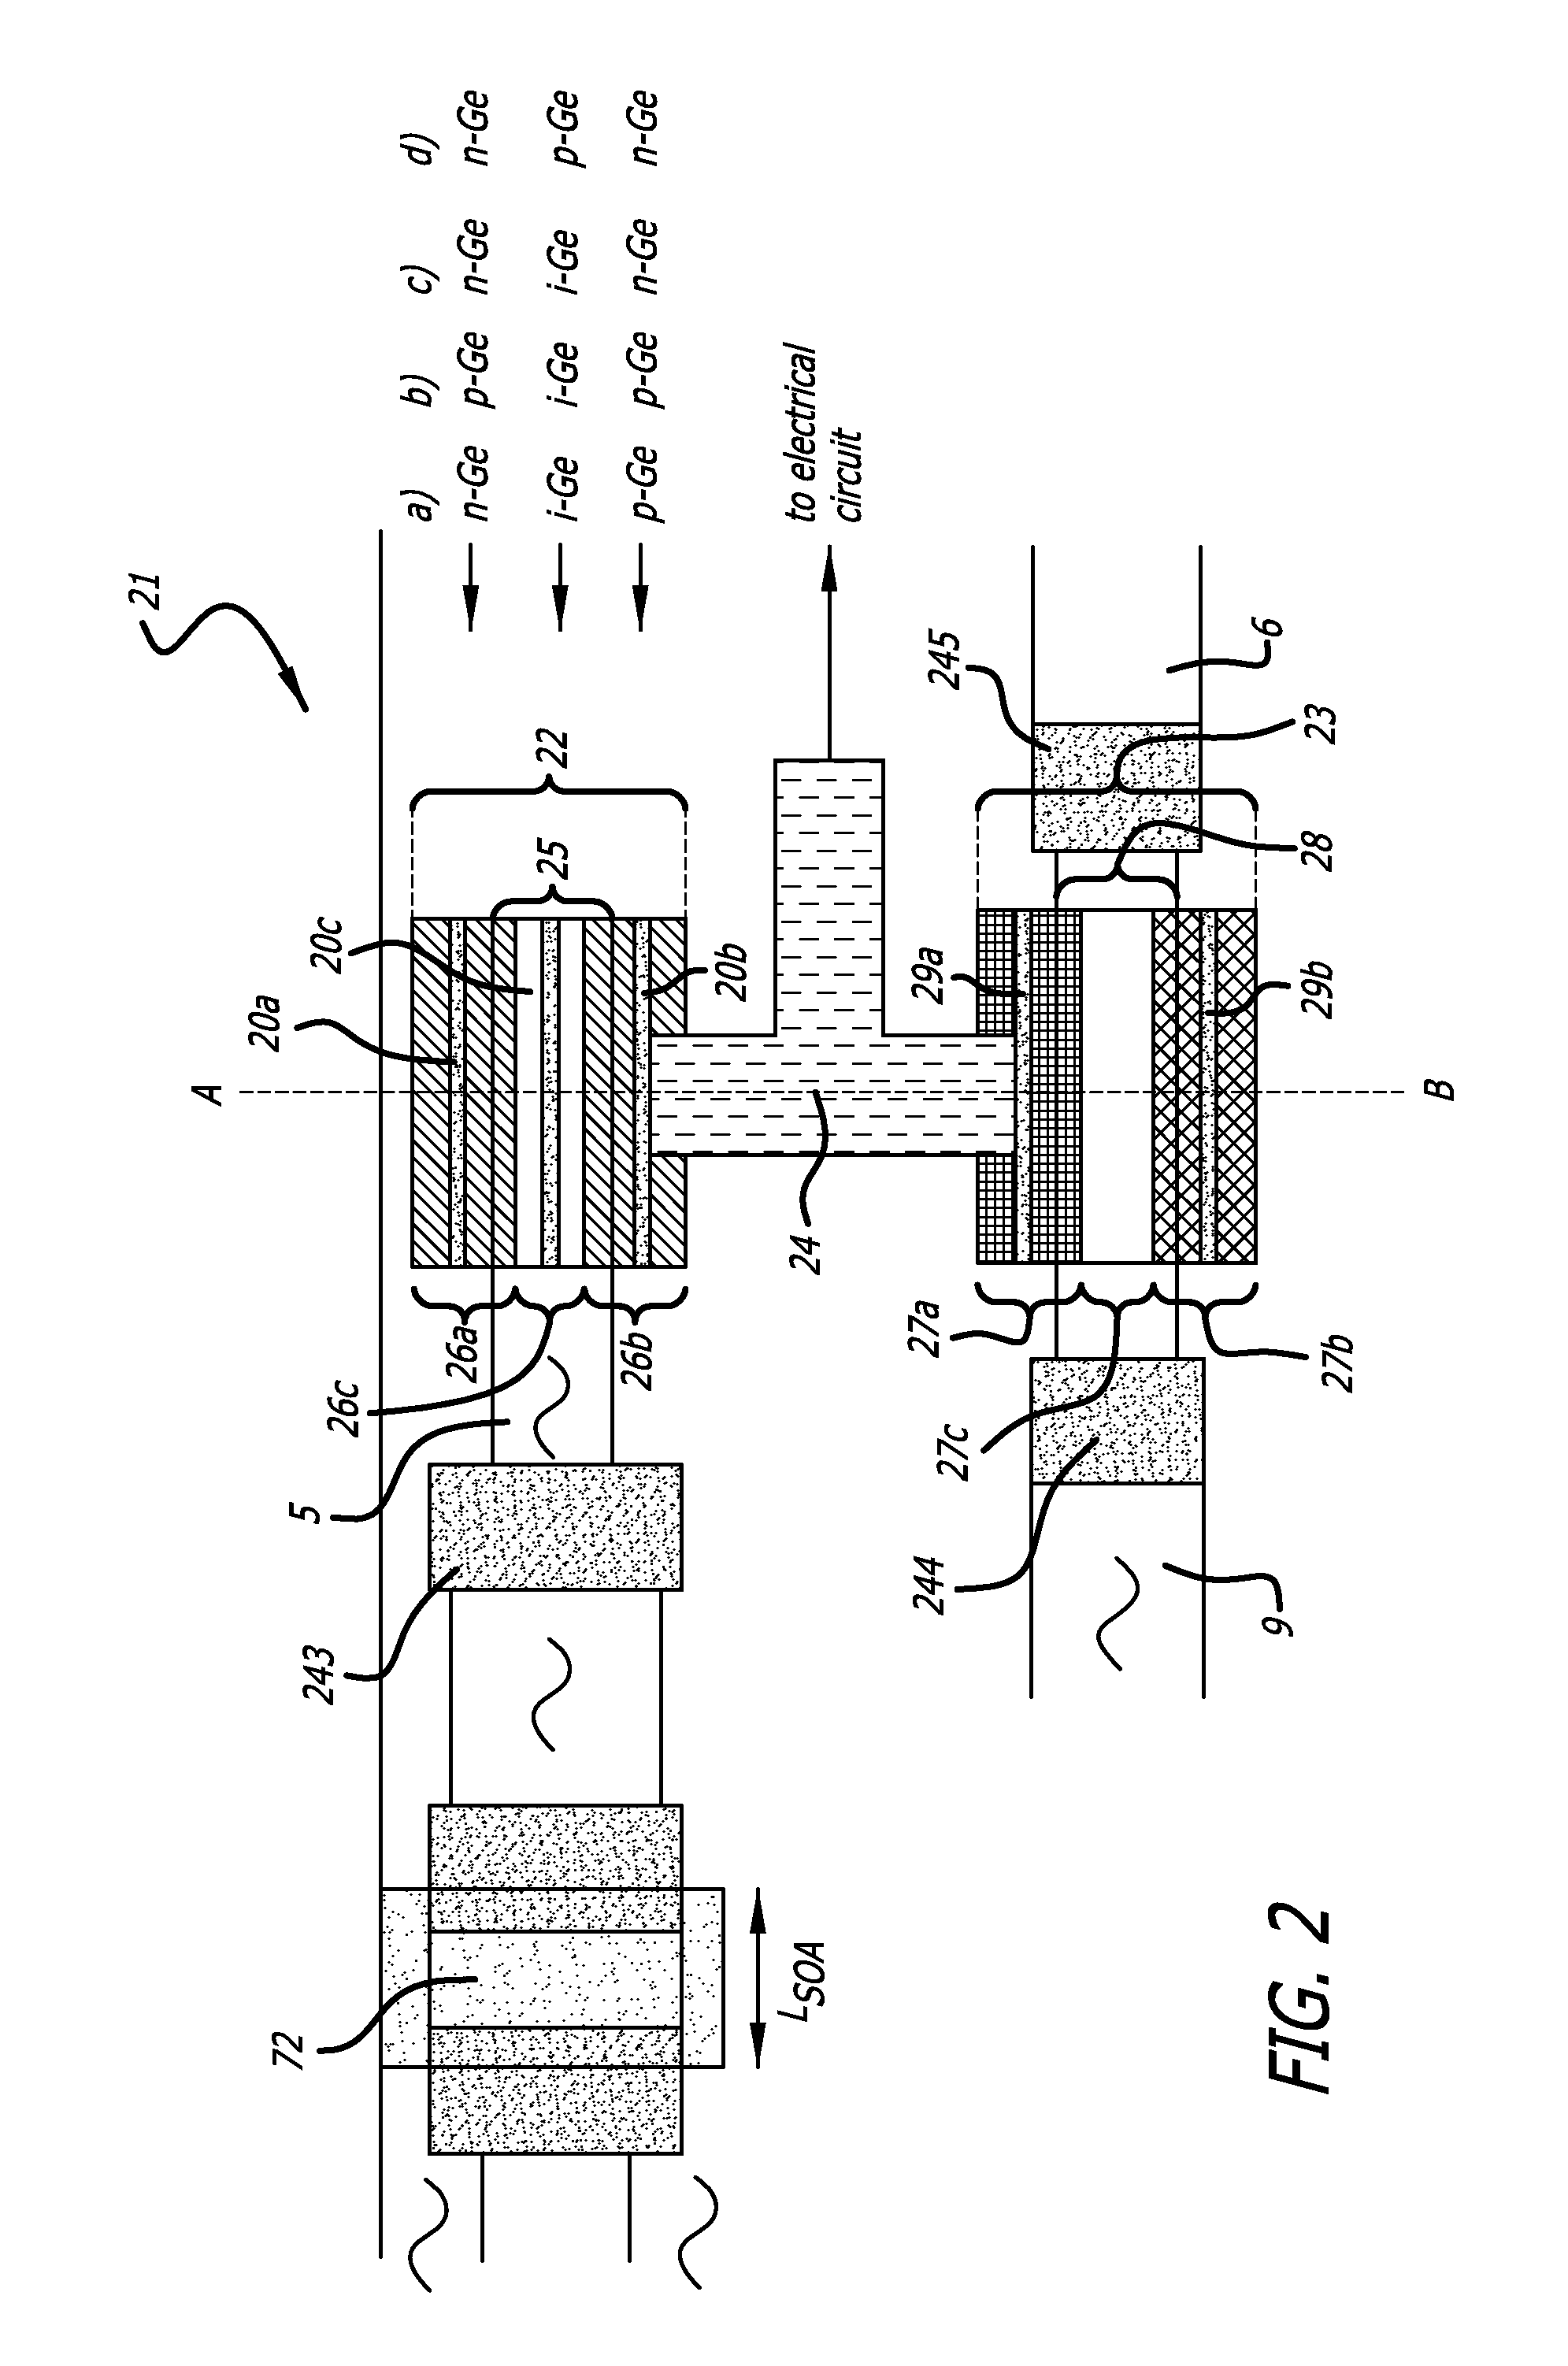 Detector remodulator and optoelectronic switch